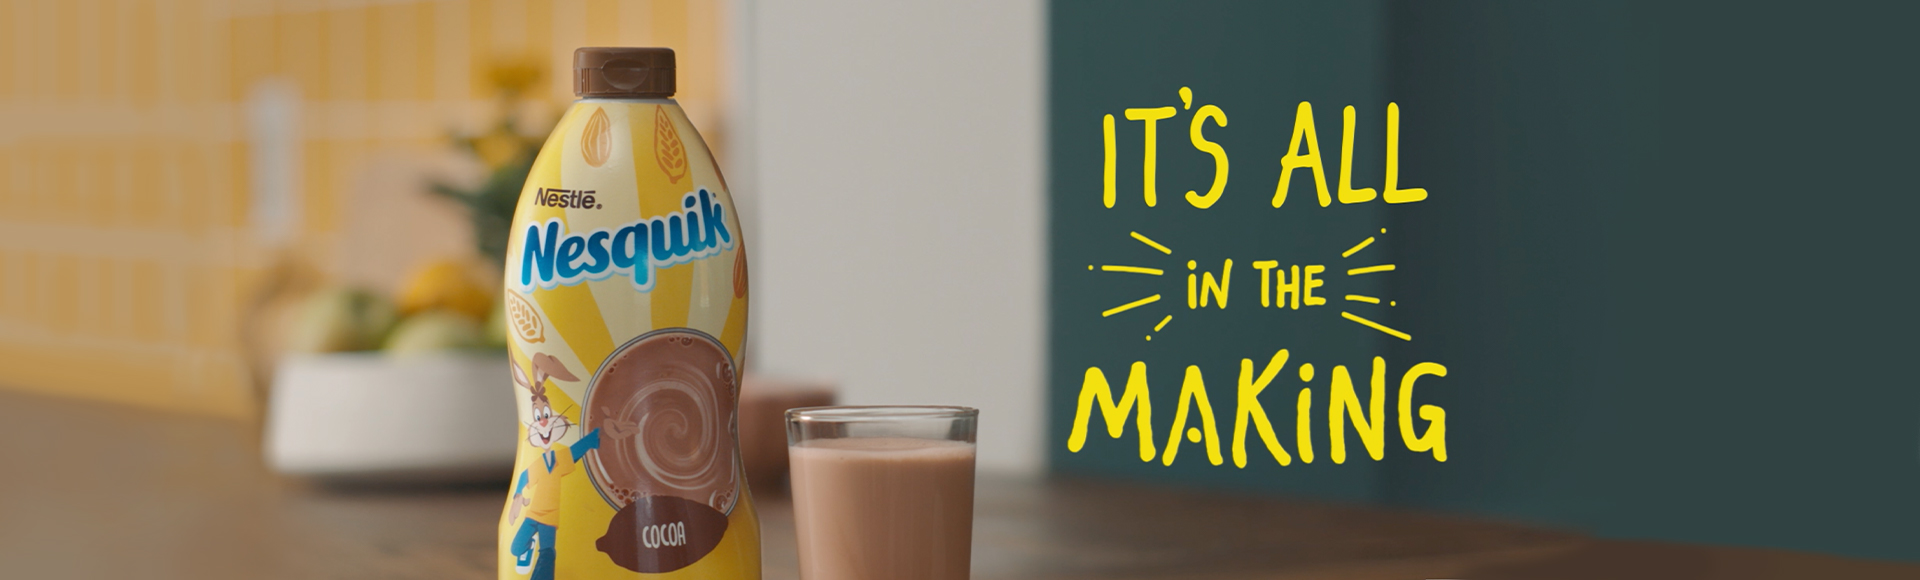 Nesquik It`s all in the Making banner